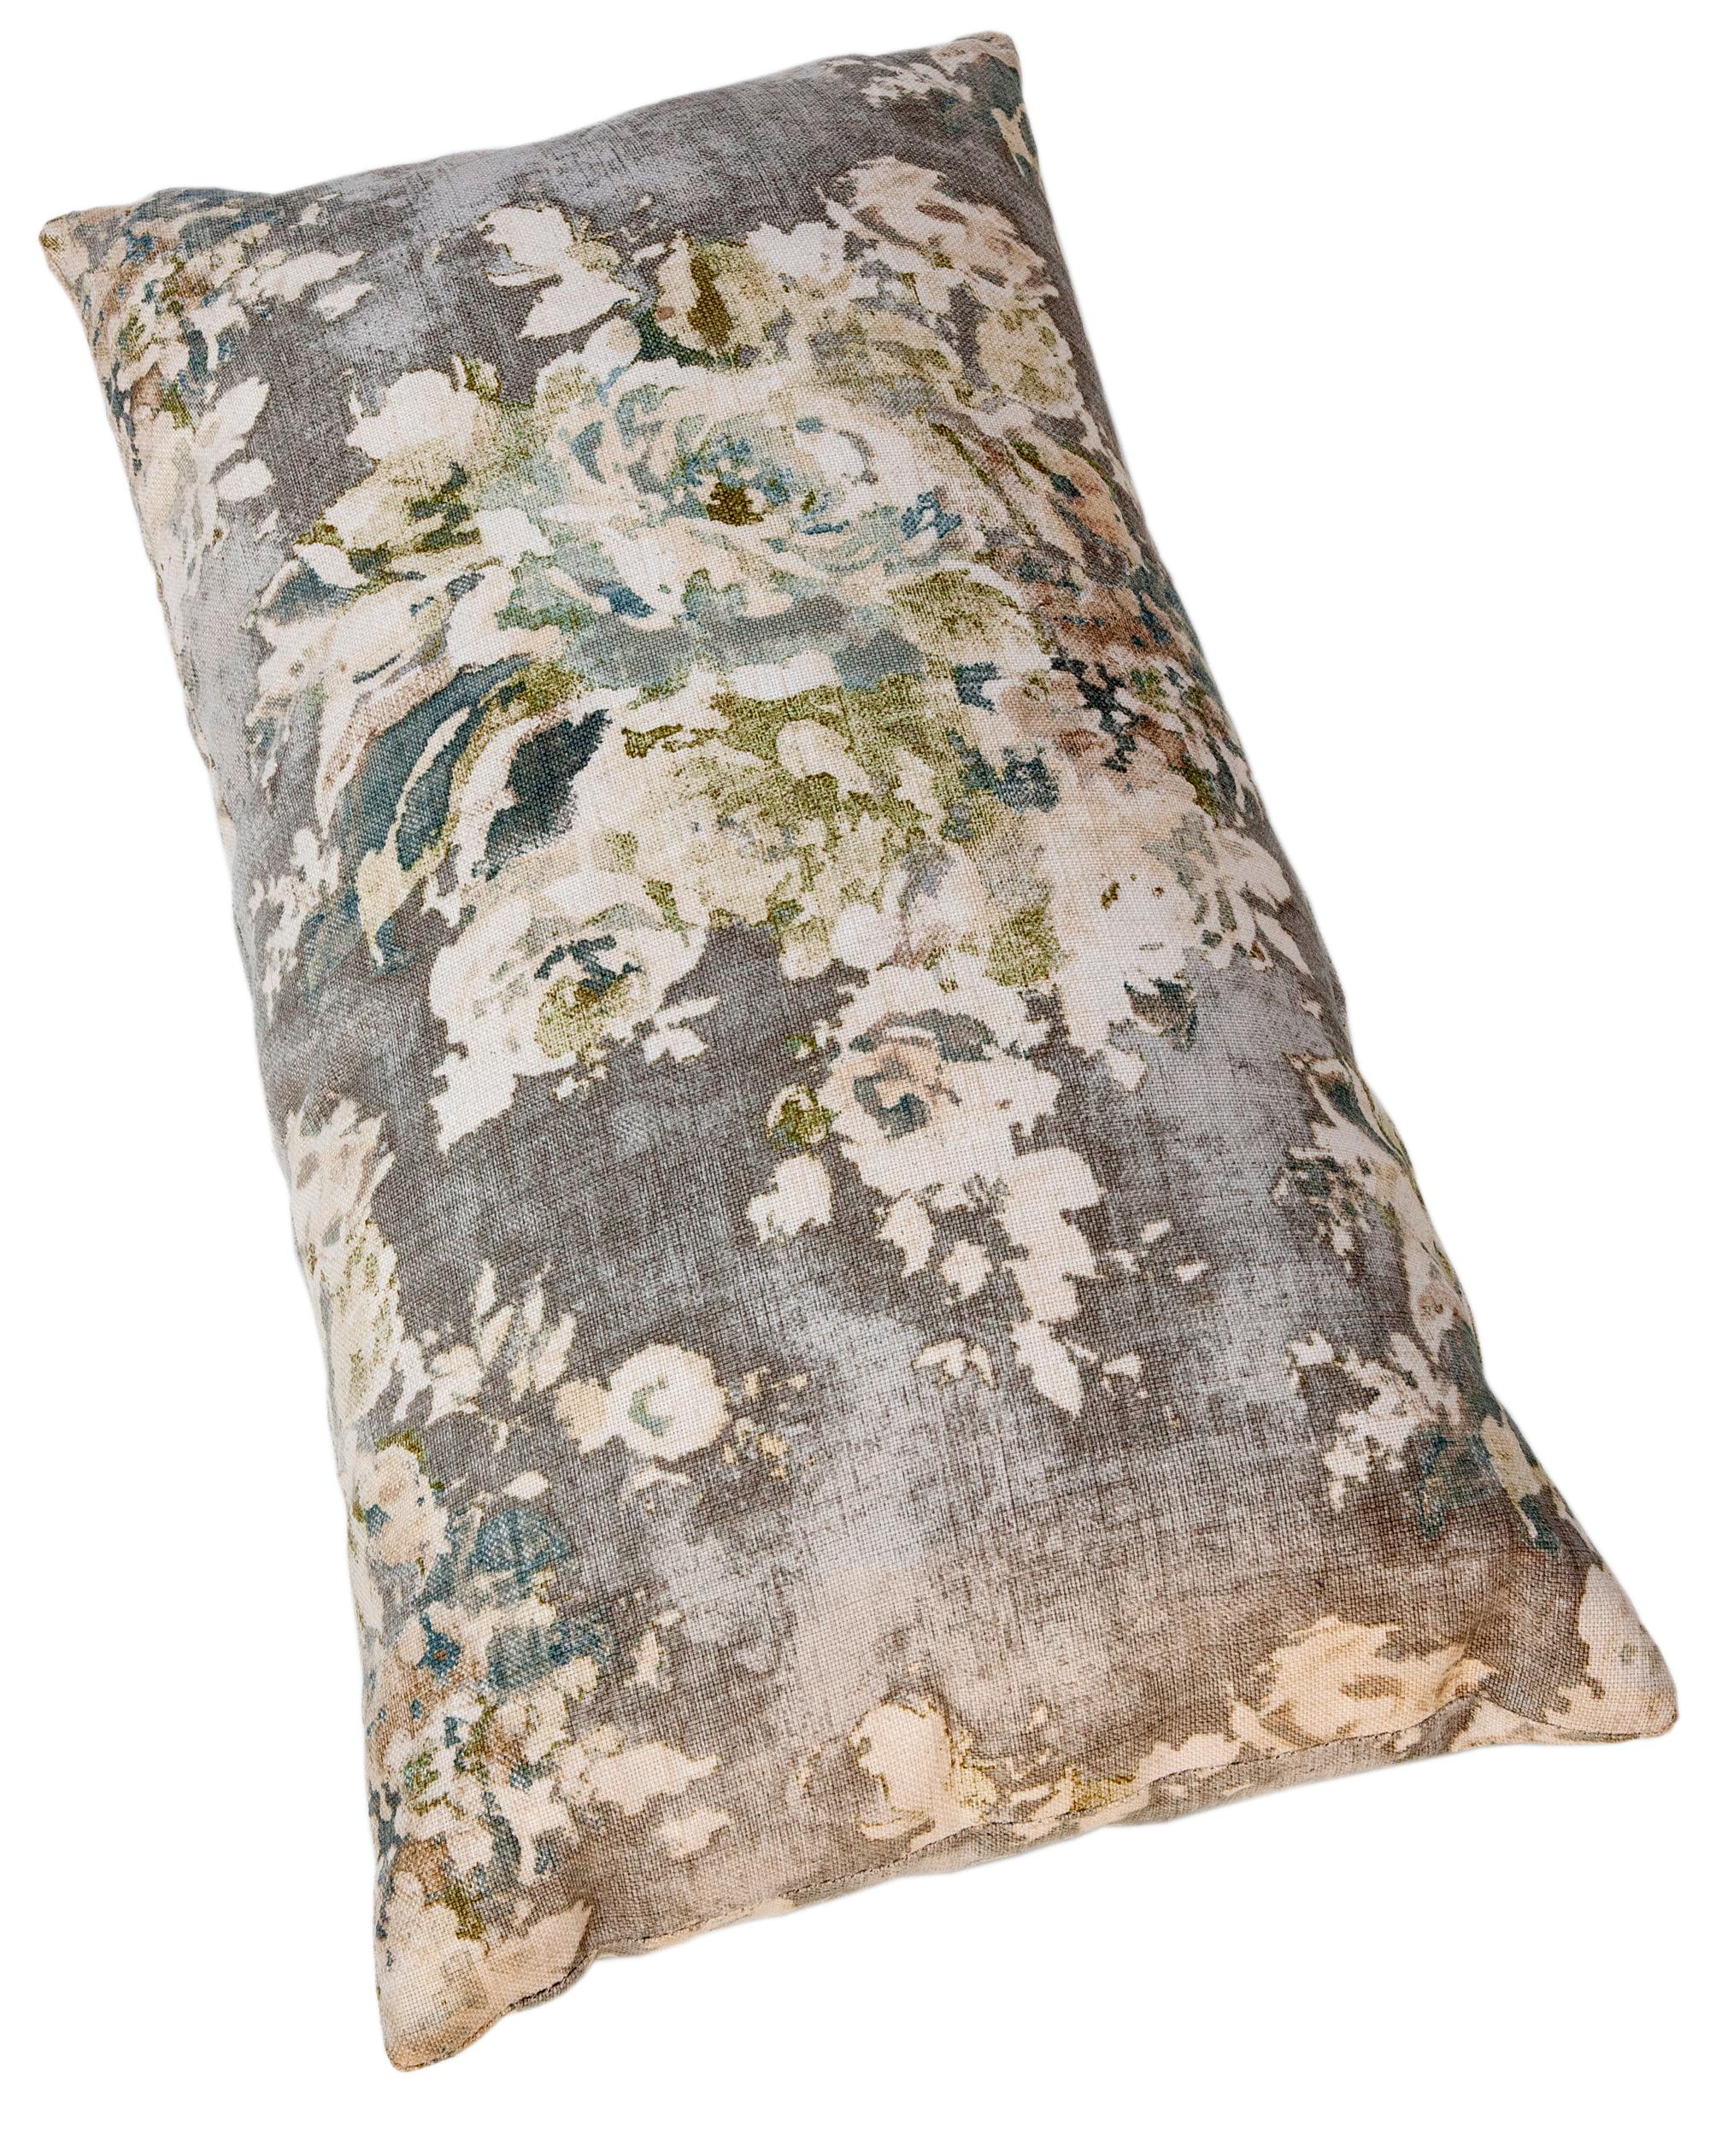 20th Century Printed Linen King-Size Zippered Pillow For Sale